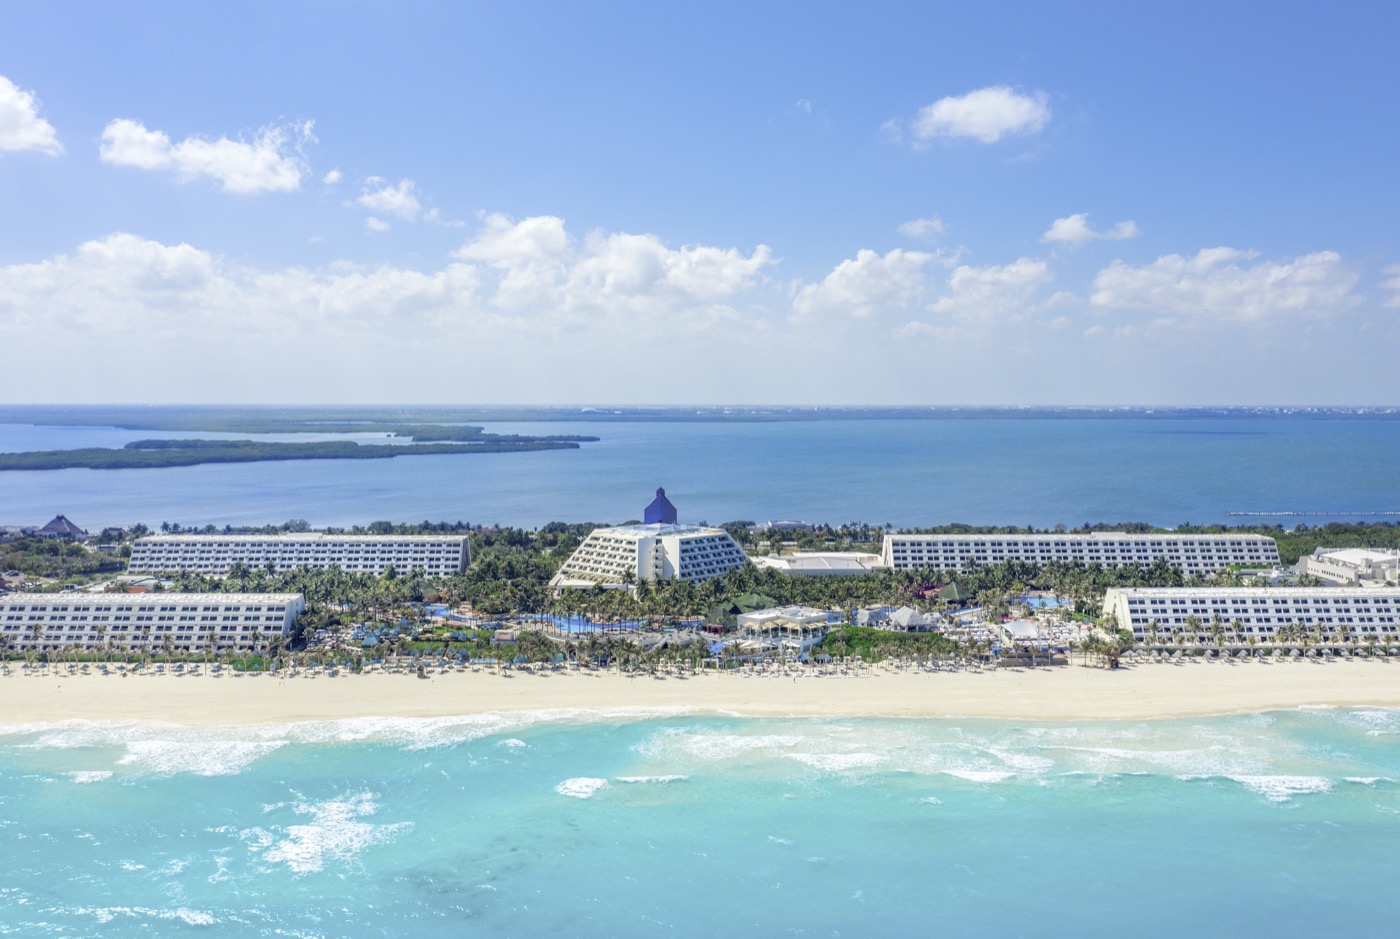 Panoramic View of Hotel Grand Oasis Cancun with ocean view